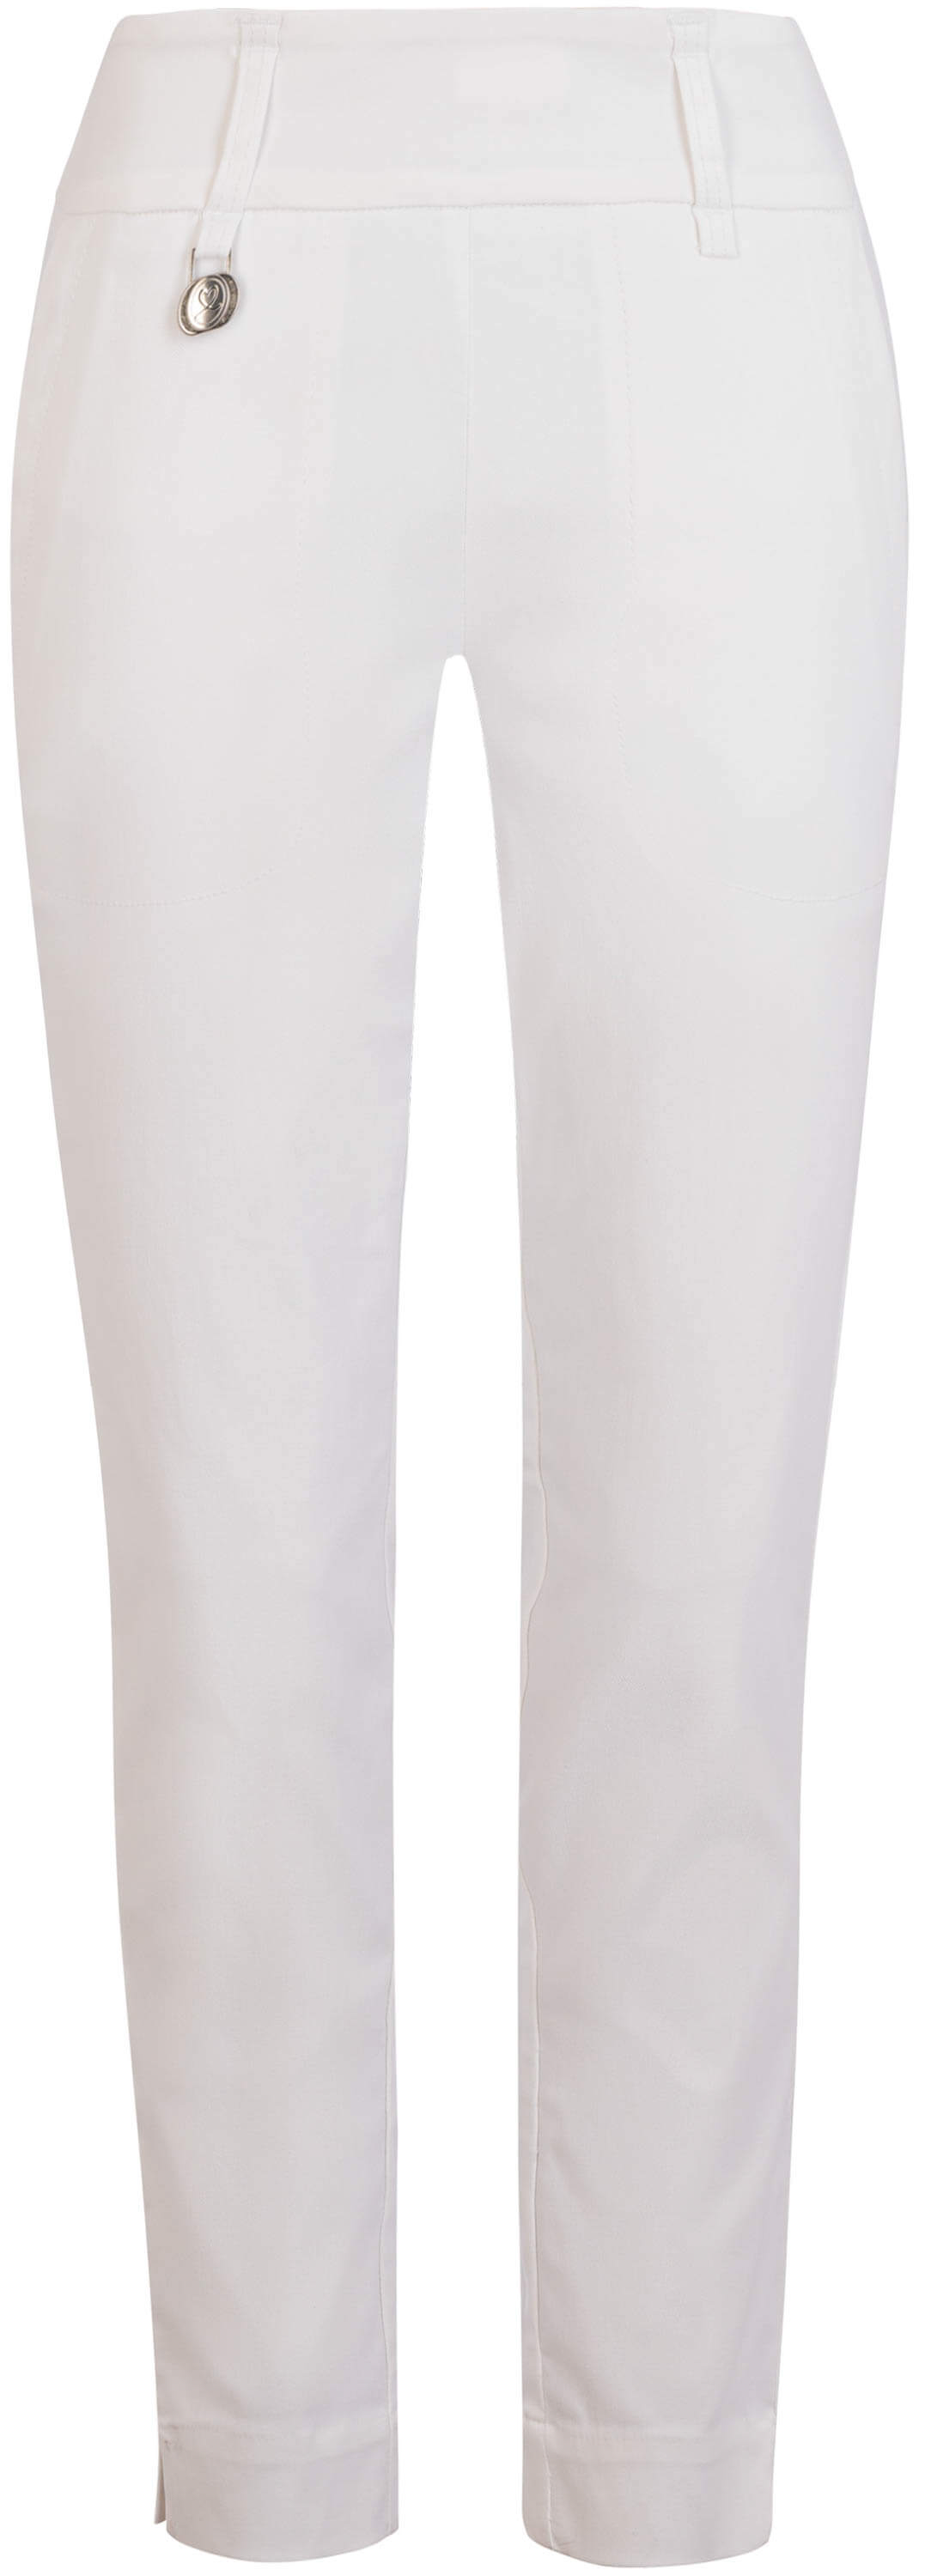 Daily Sports Magic High Water Pant, white